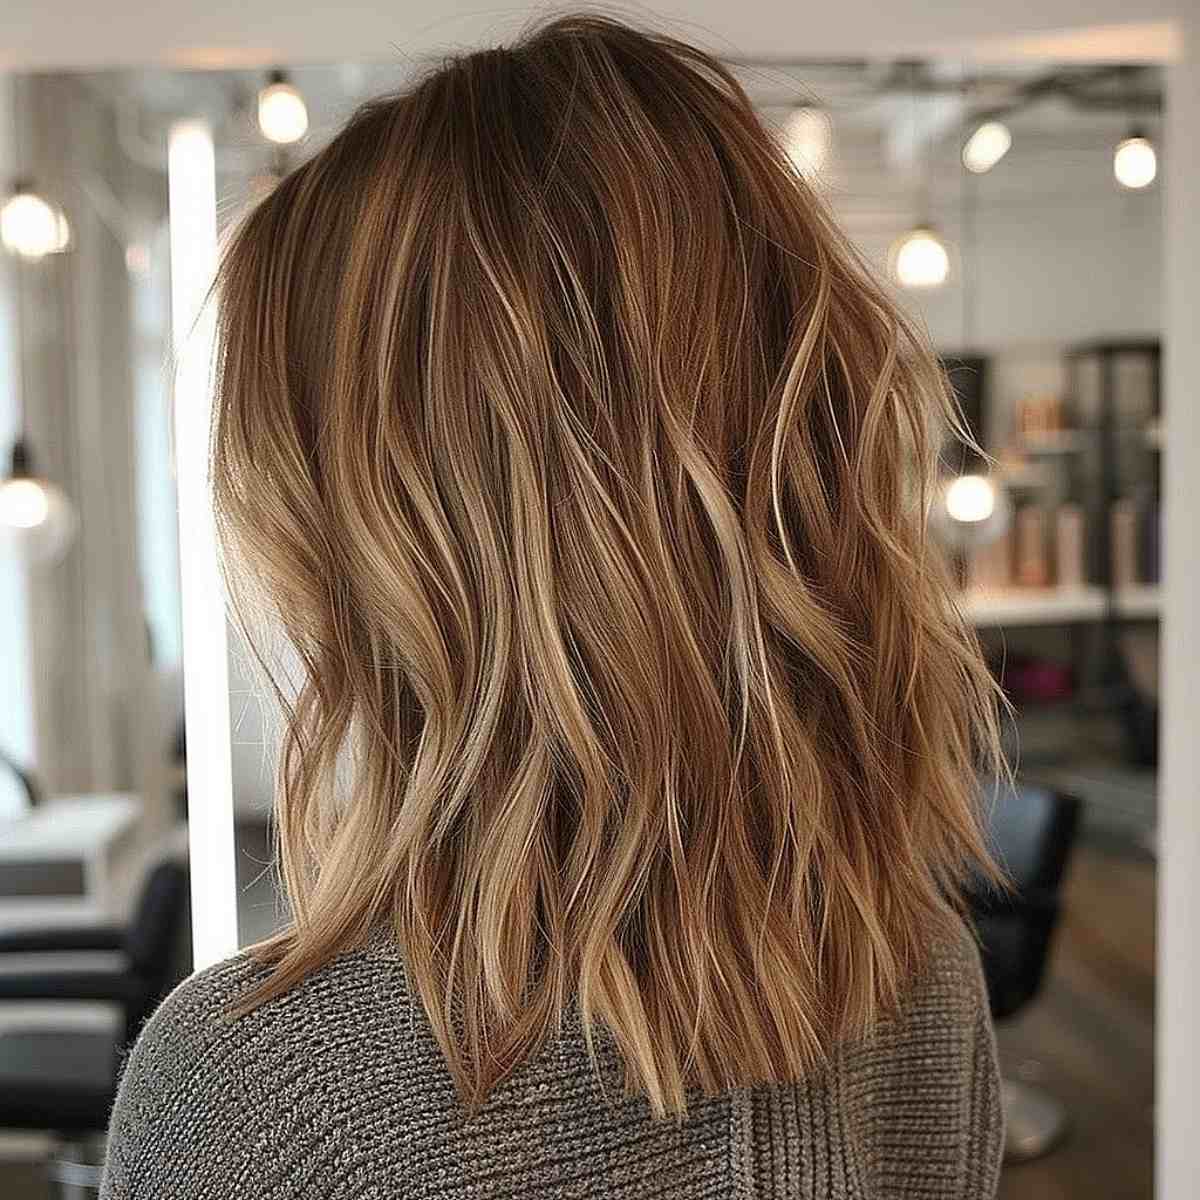 Uneven Layers and Balayage